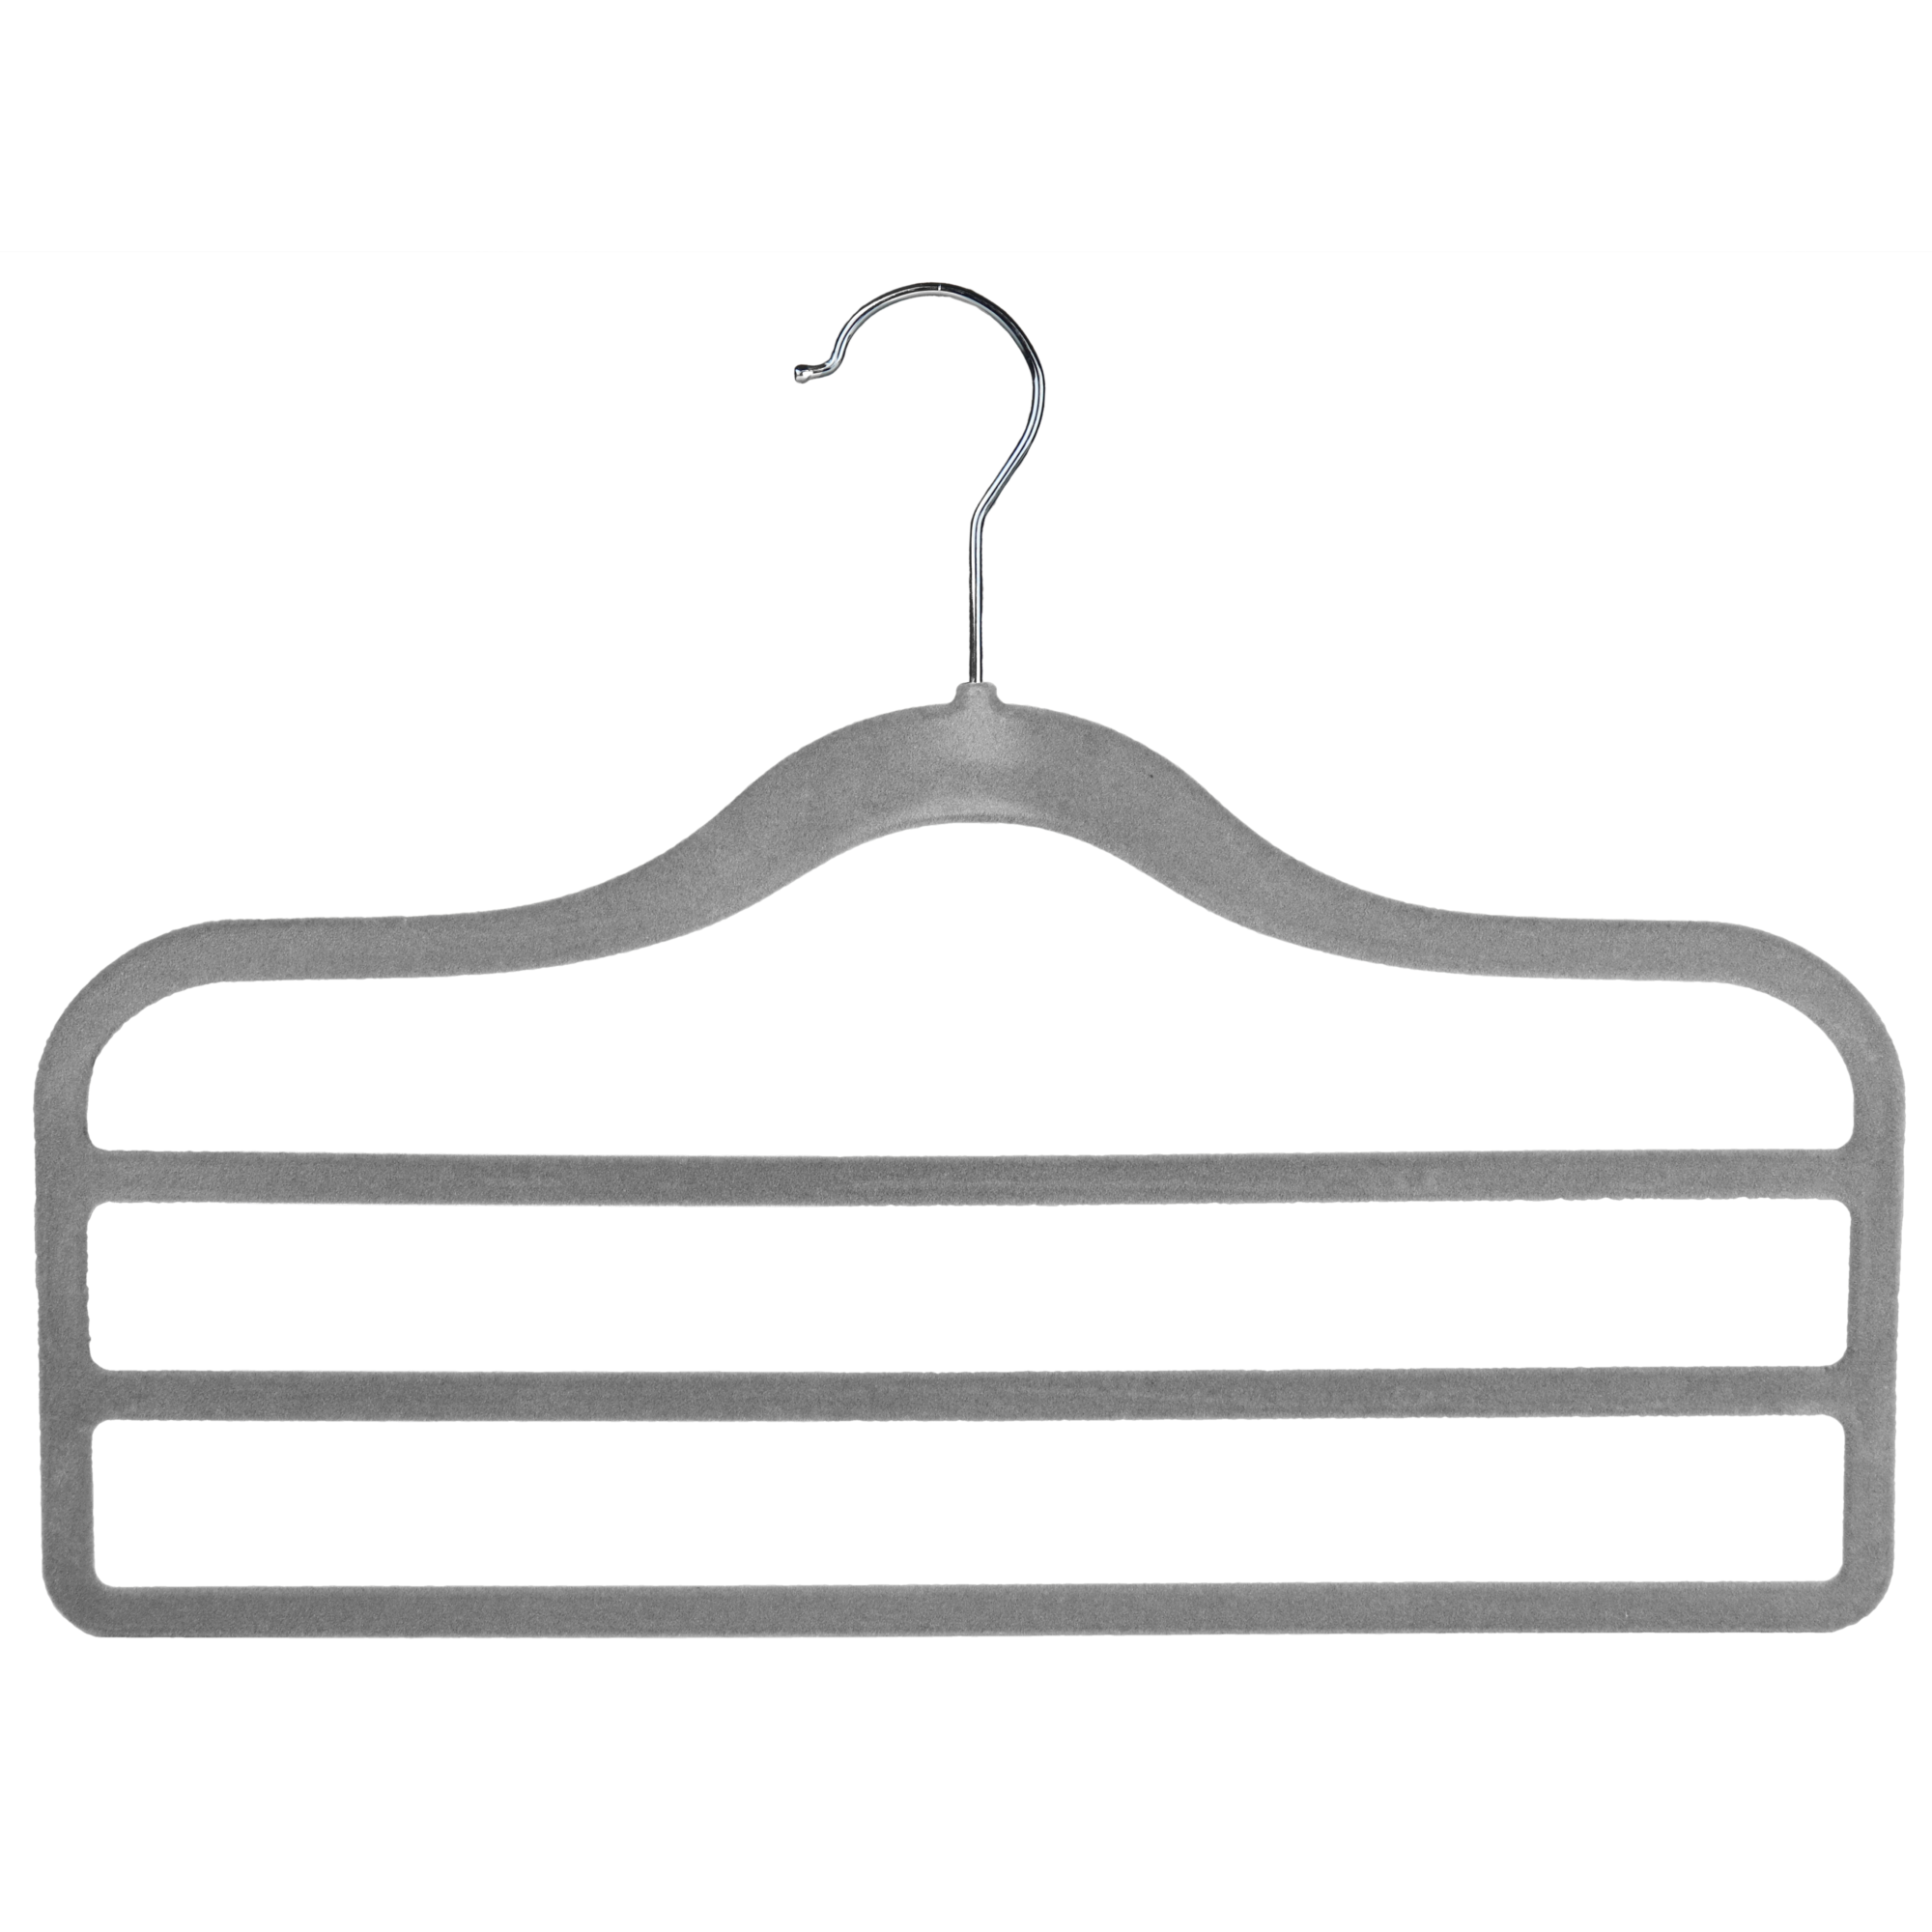 Best For Pants Hangers For Multiple Pairs